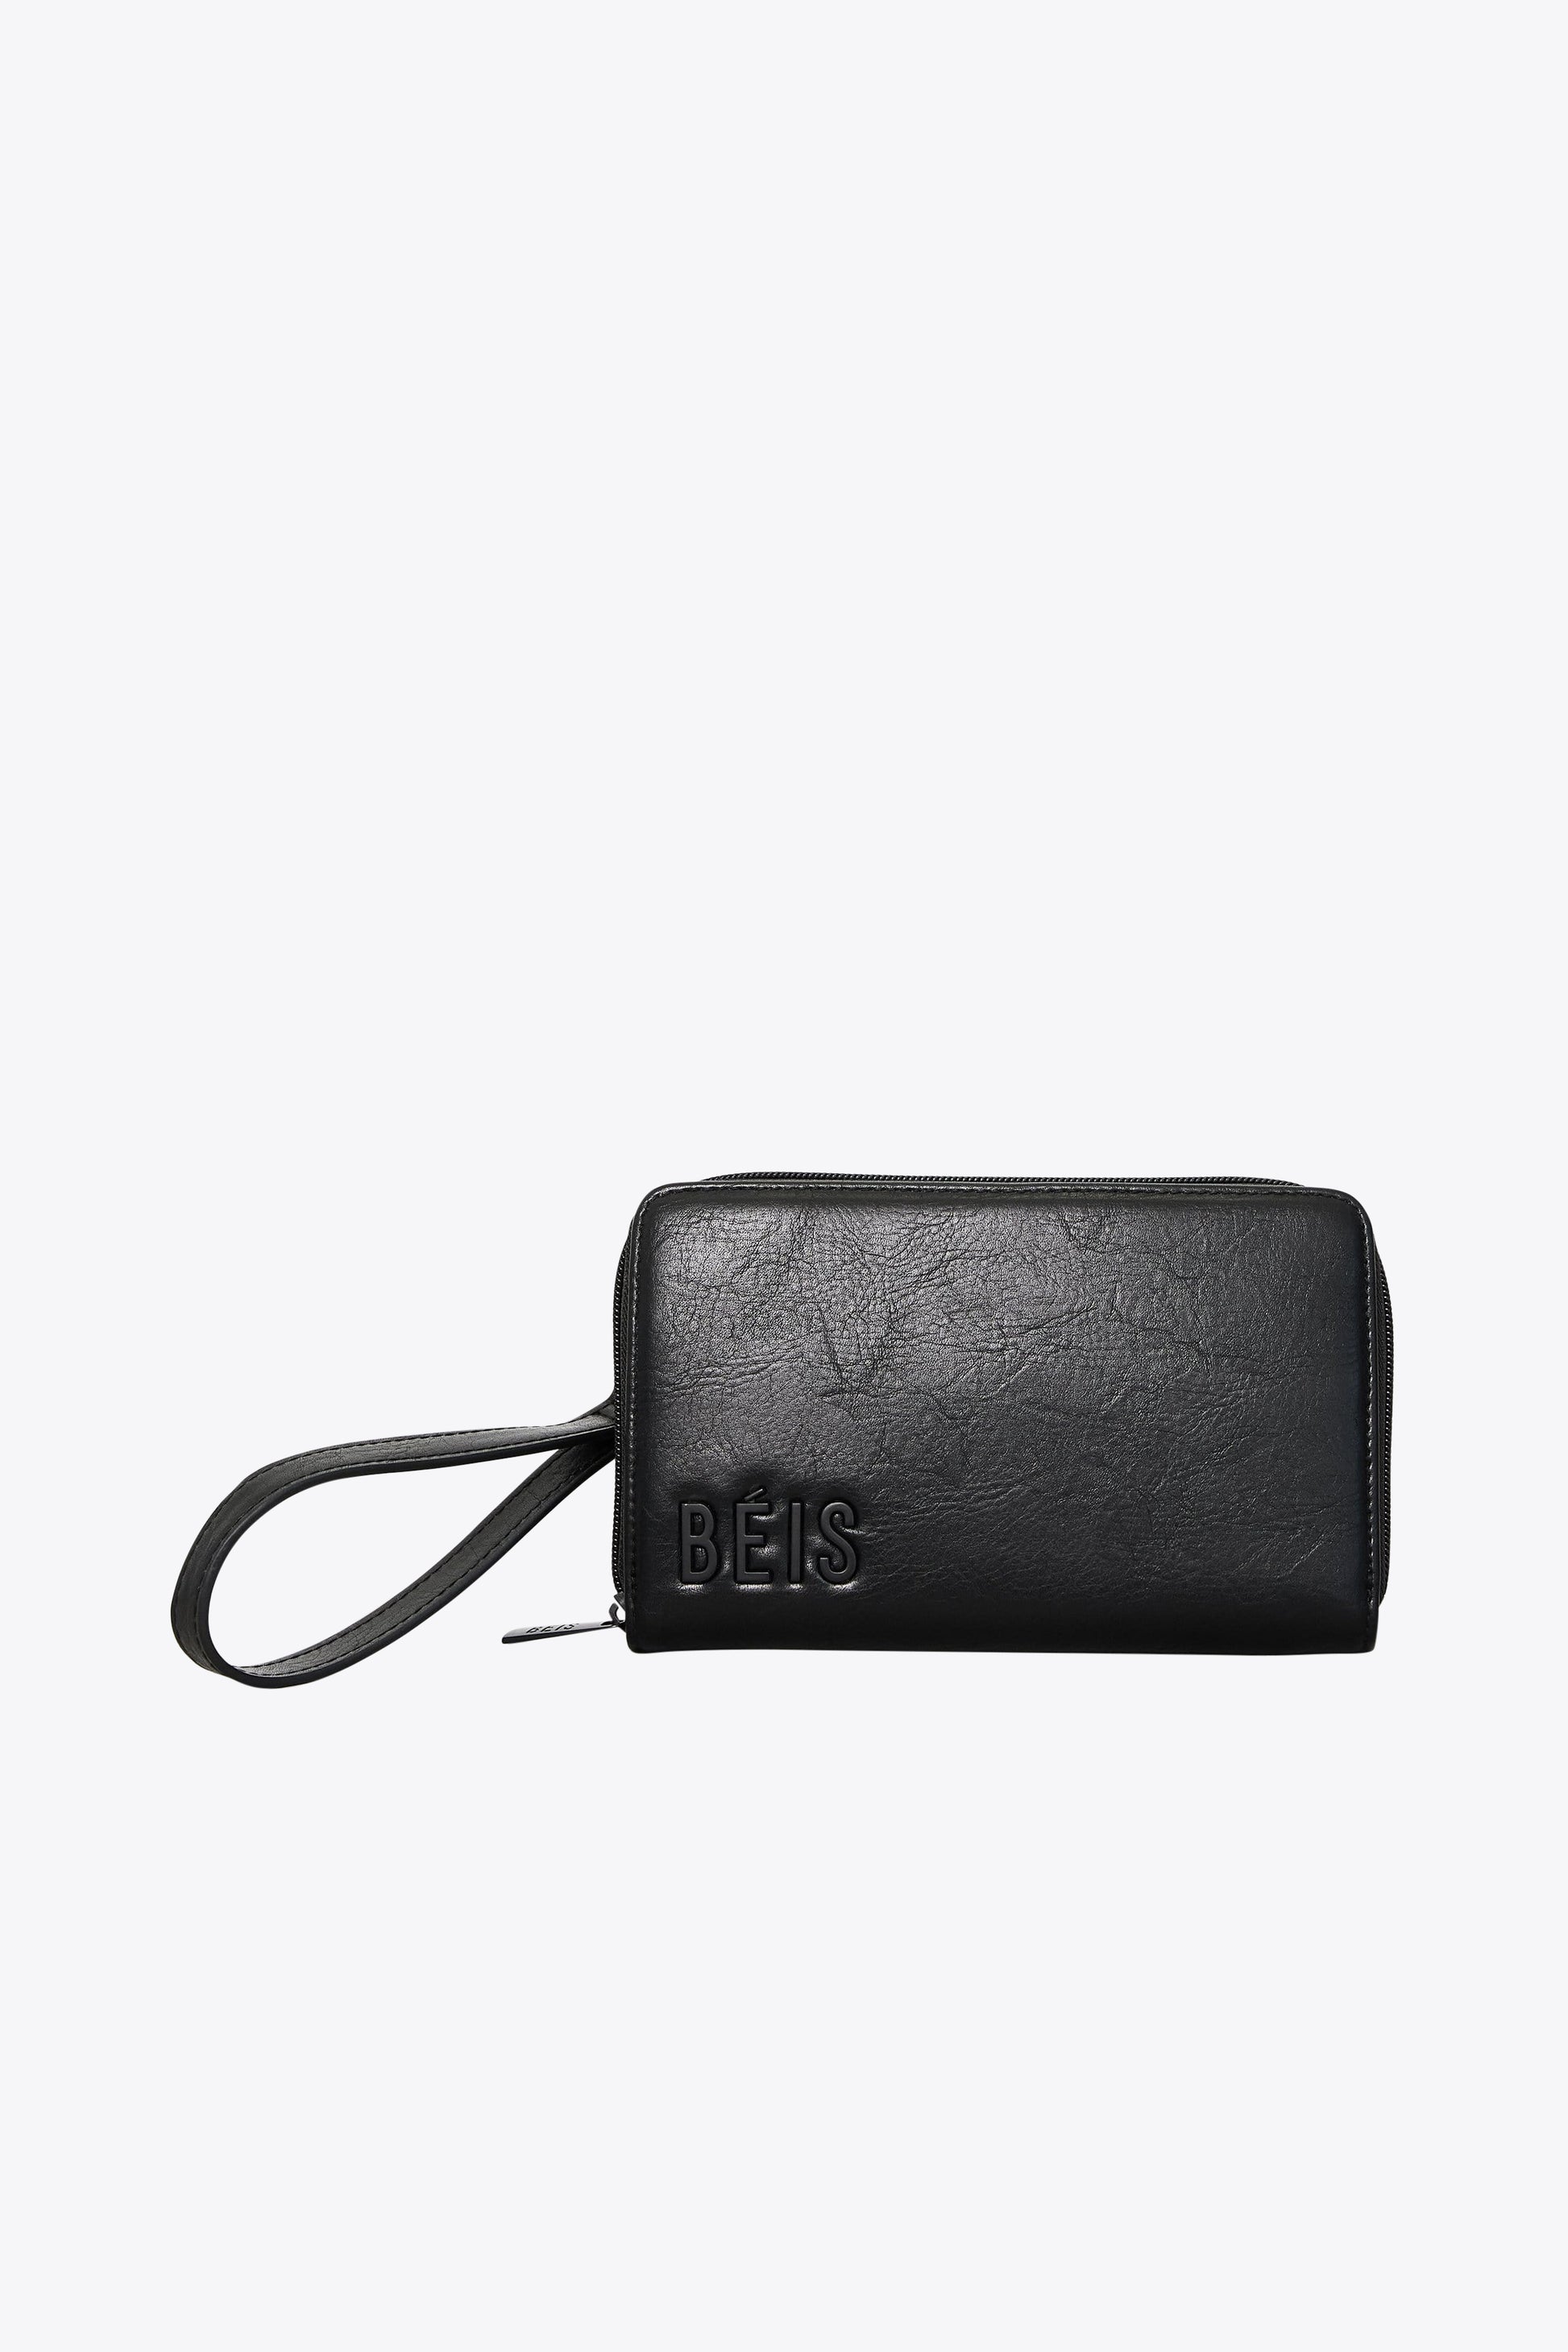 dkny bags new collection 2021